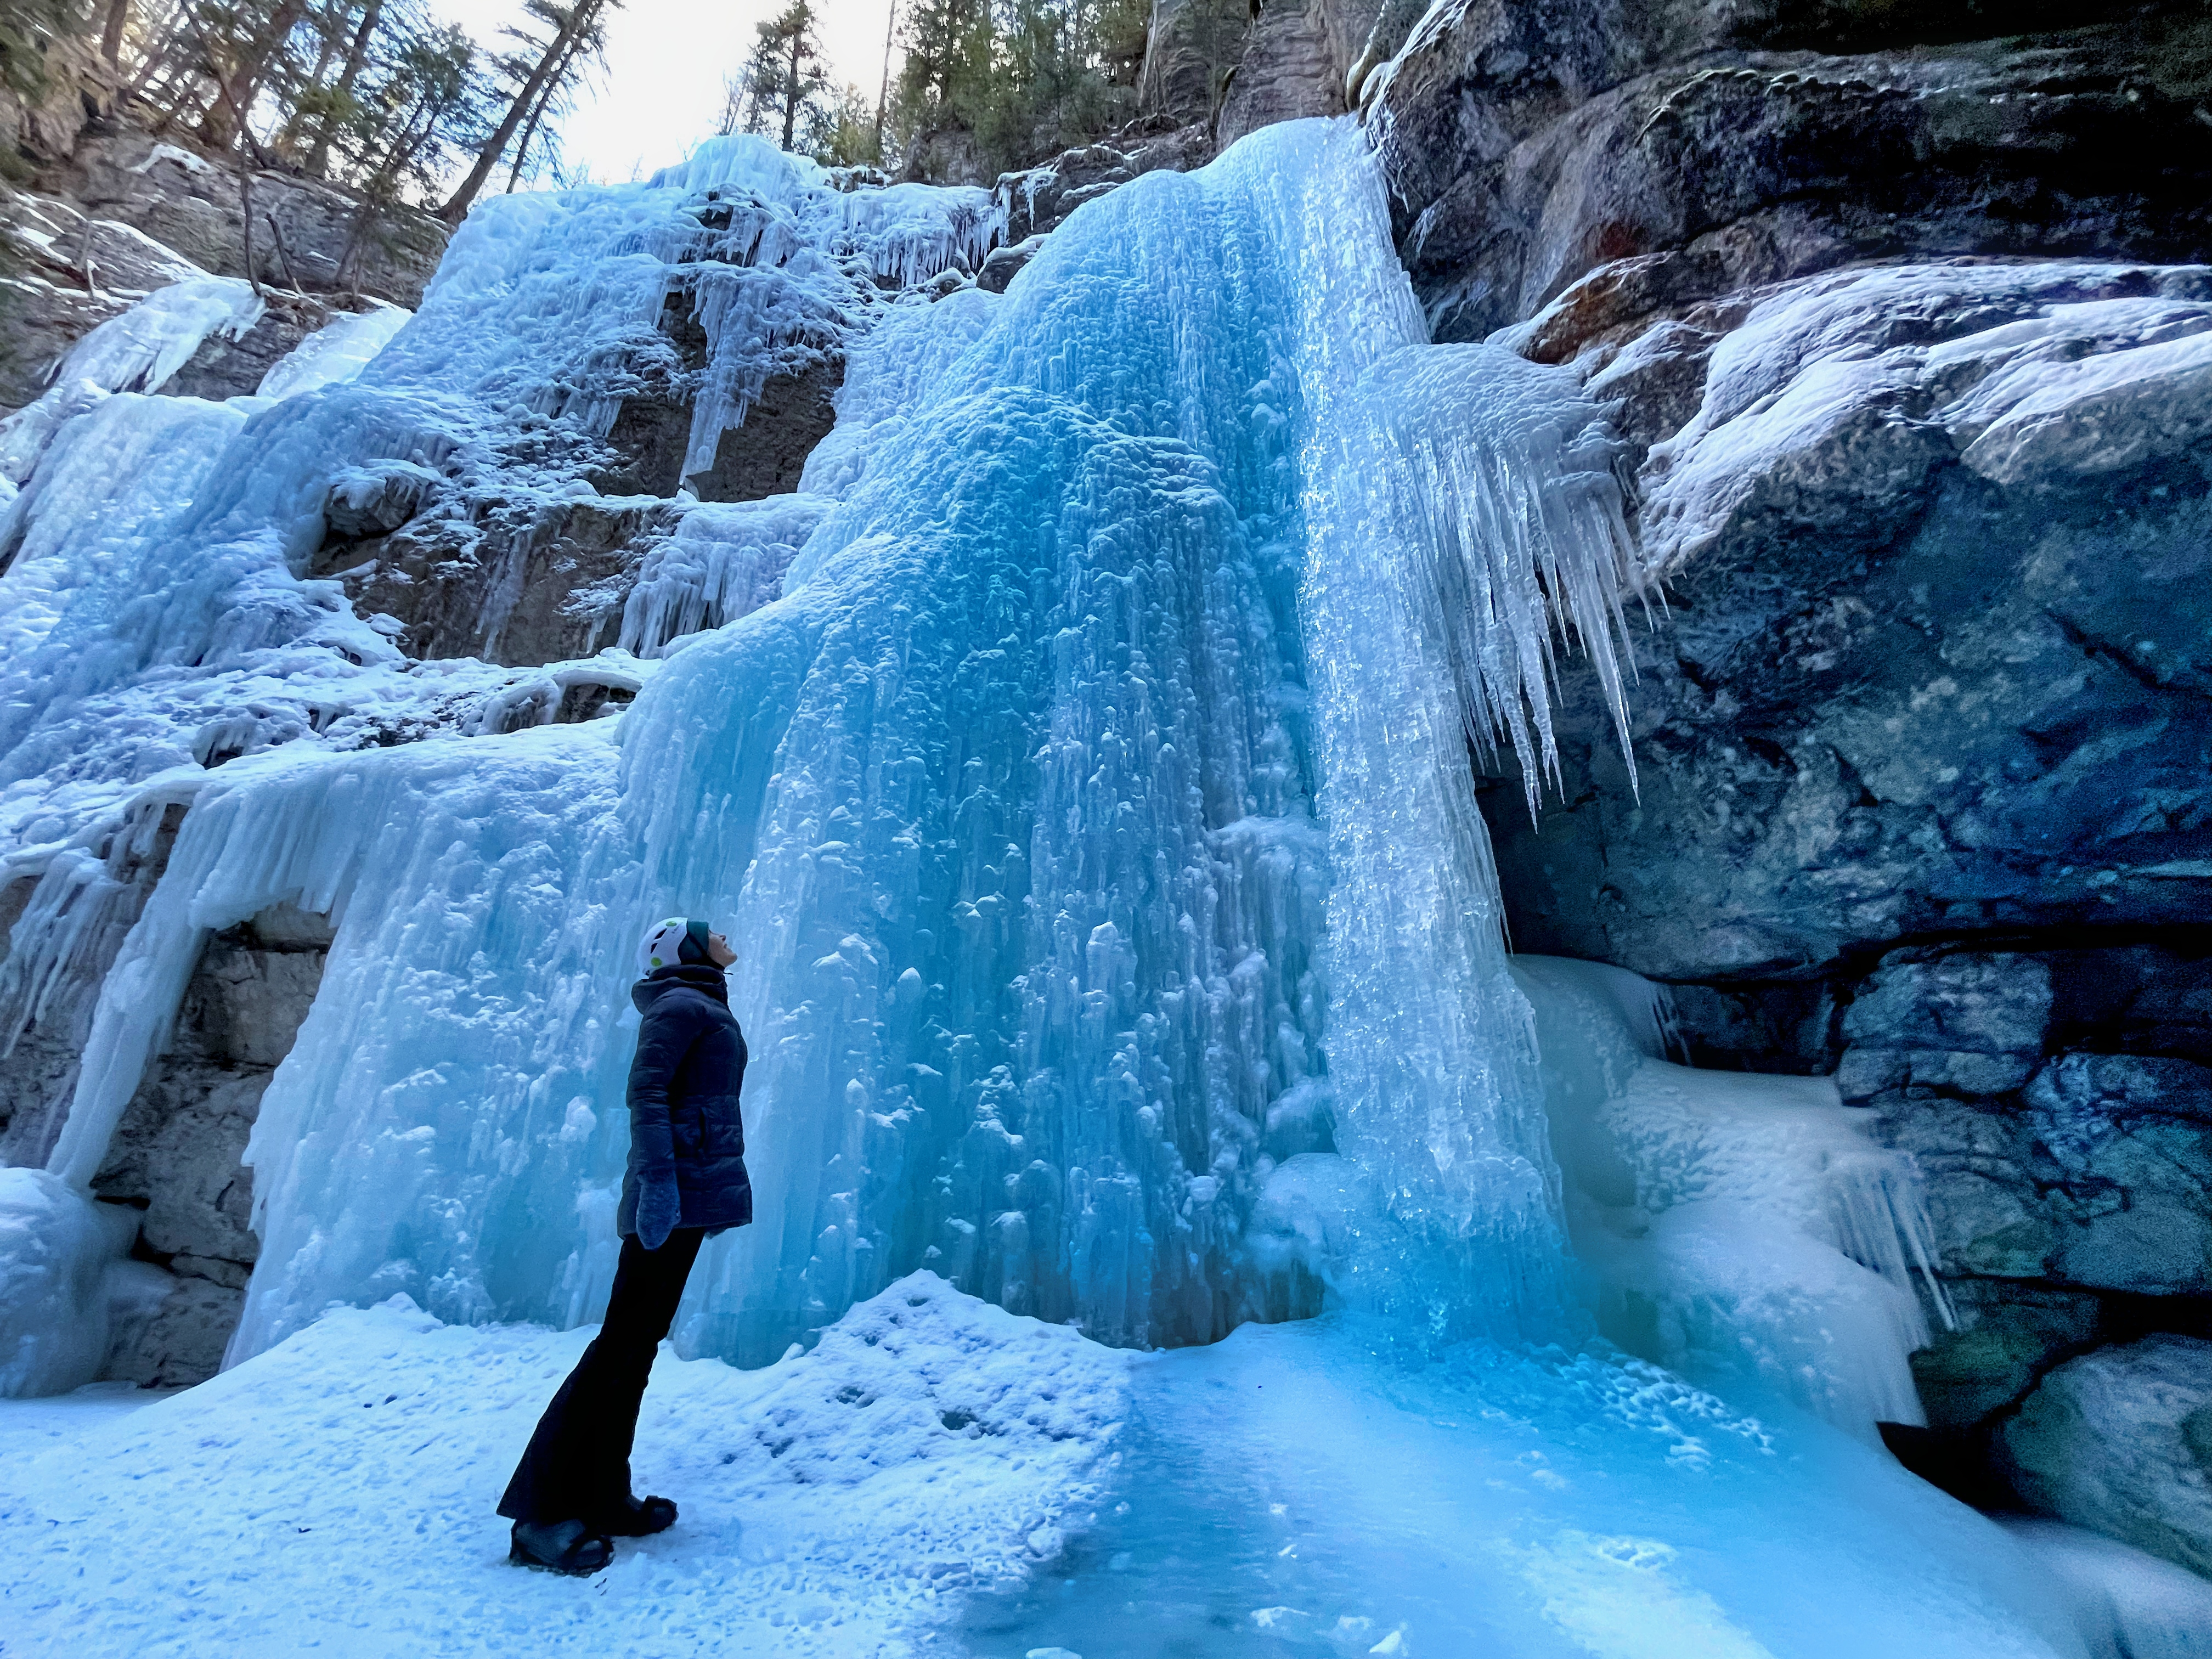 Standing by a frozen waterfall